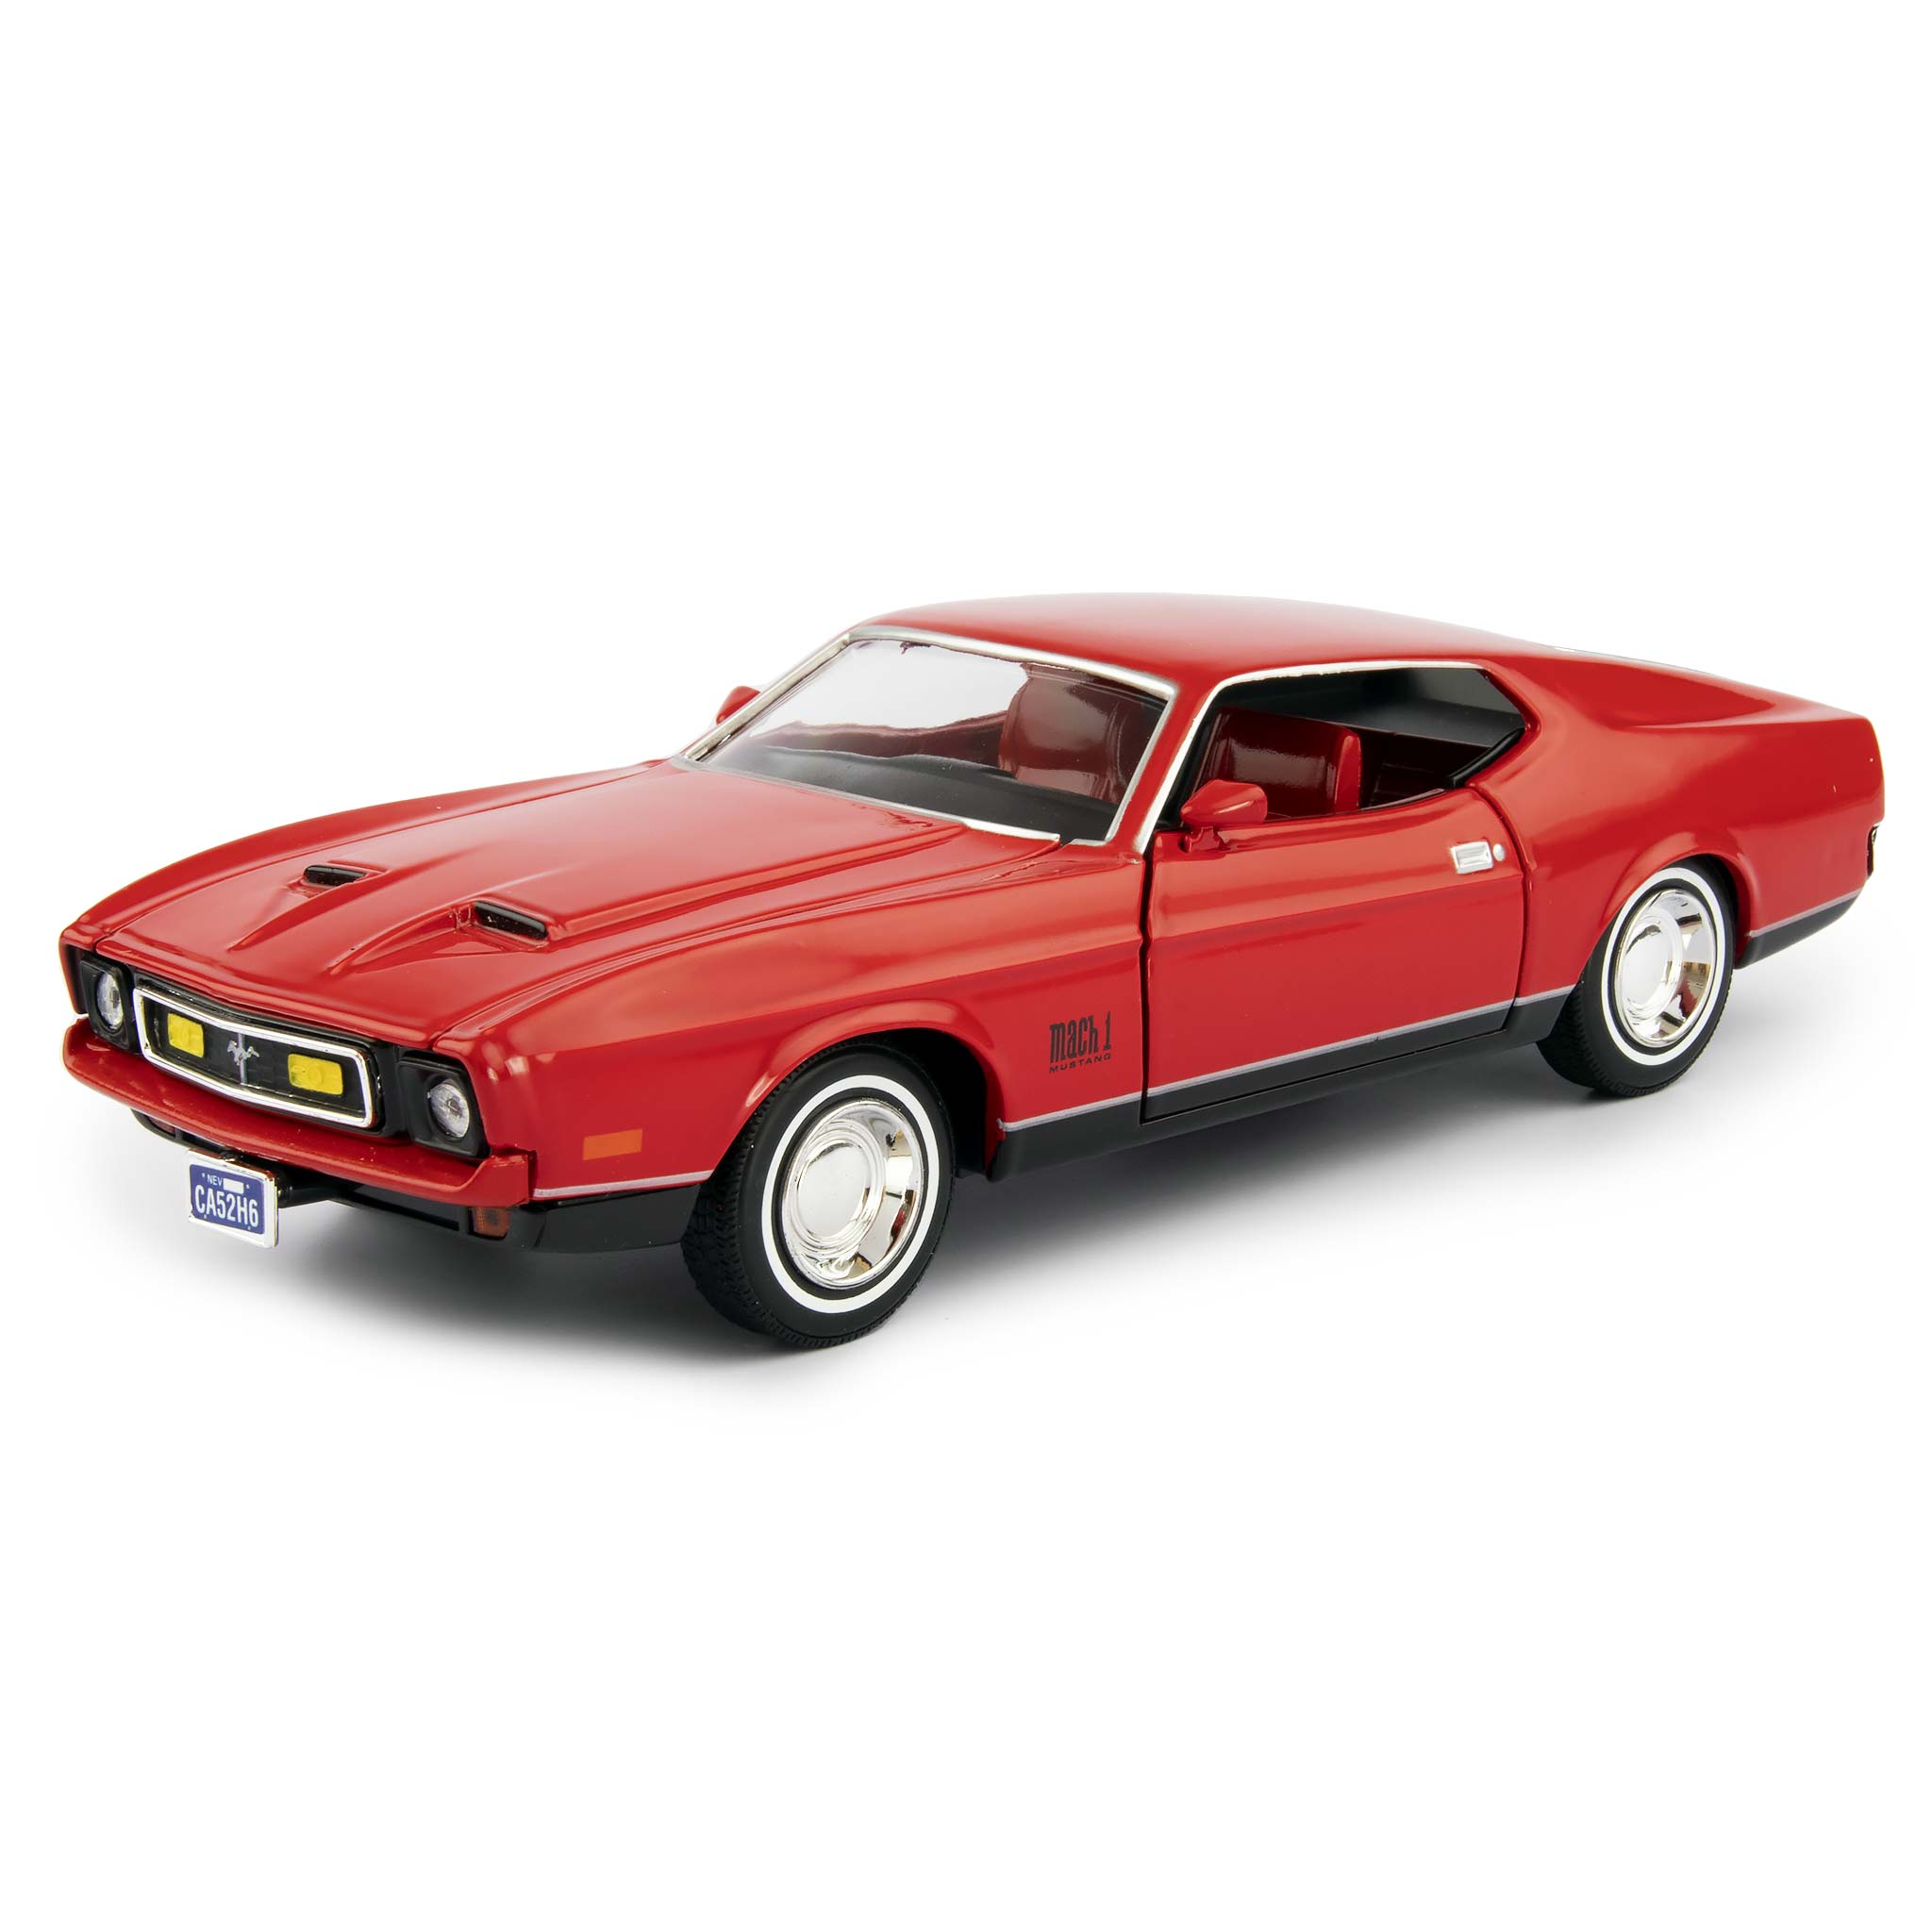 Ford Mustang Mach 1 James Bond Diamonds Are Forever - 1:24 Scale